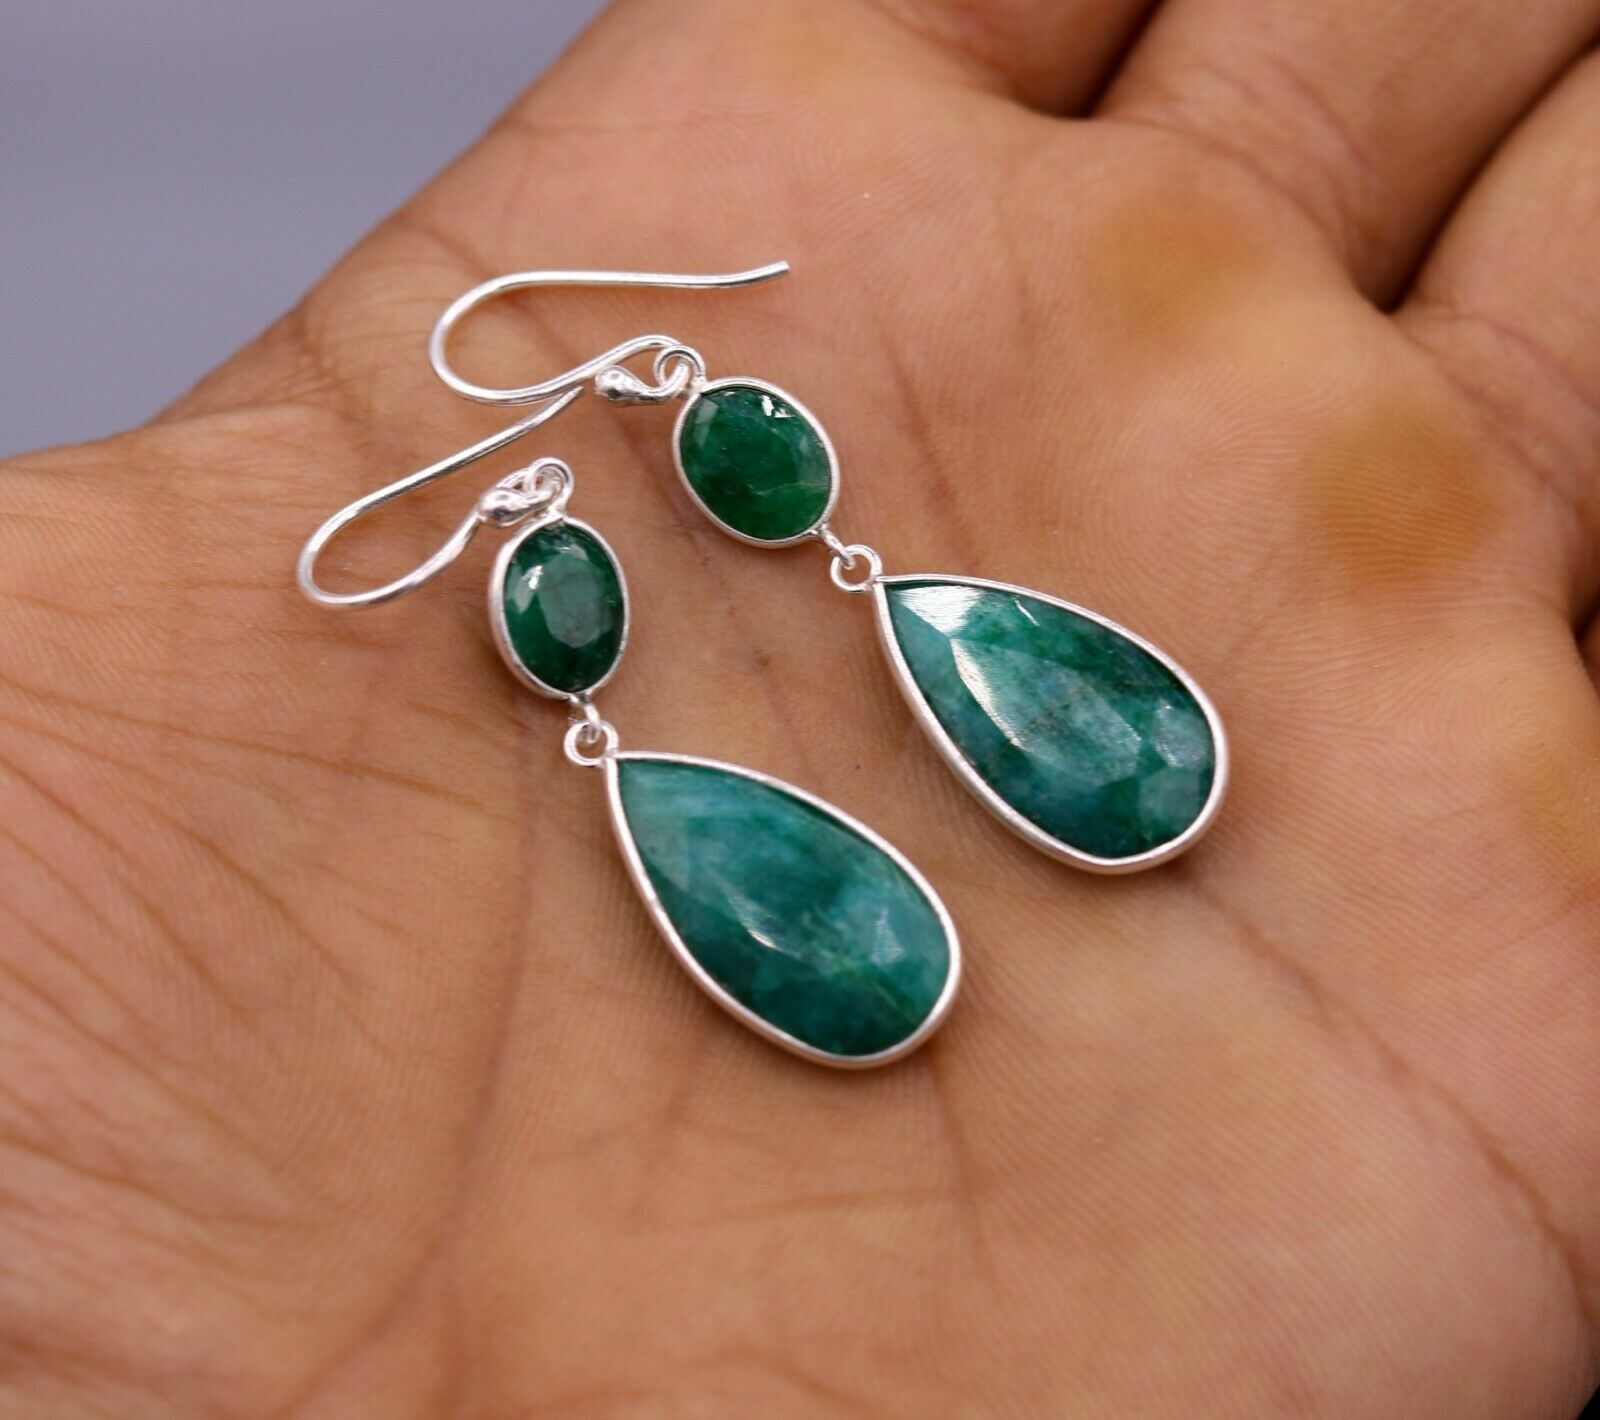 SIMULATED EMERALD 925 SILVER DAILY USE HOOPS EARRINGS DROP DANGLE GIFTING s164 - TRIBAL ORNAMENTS